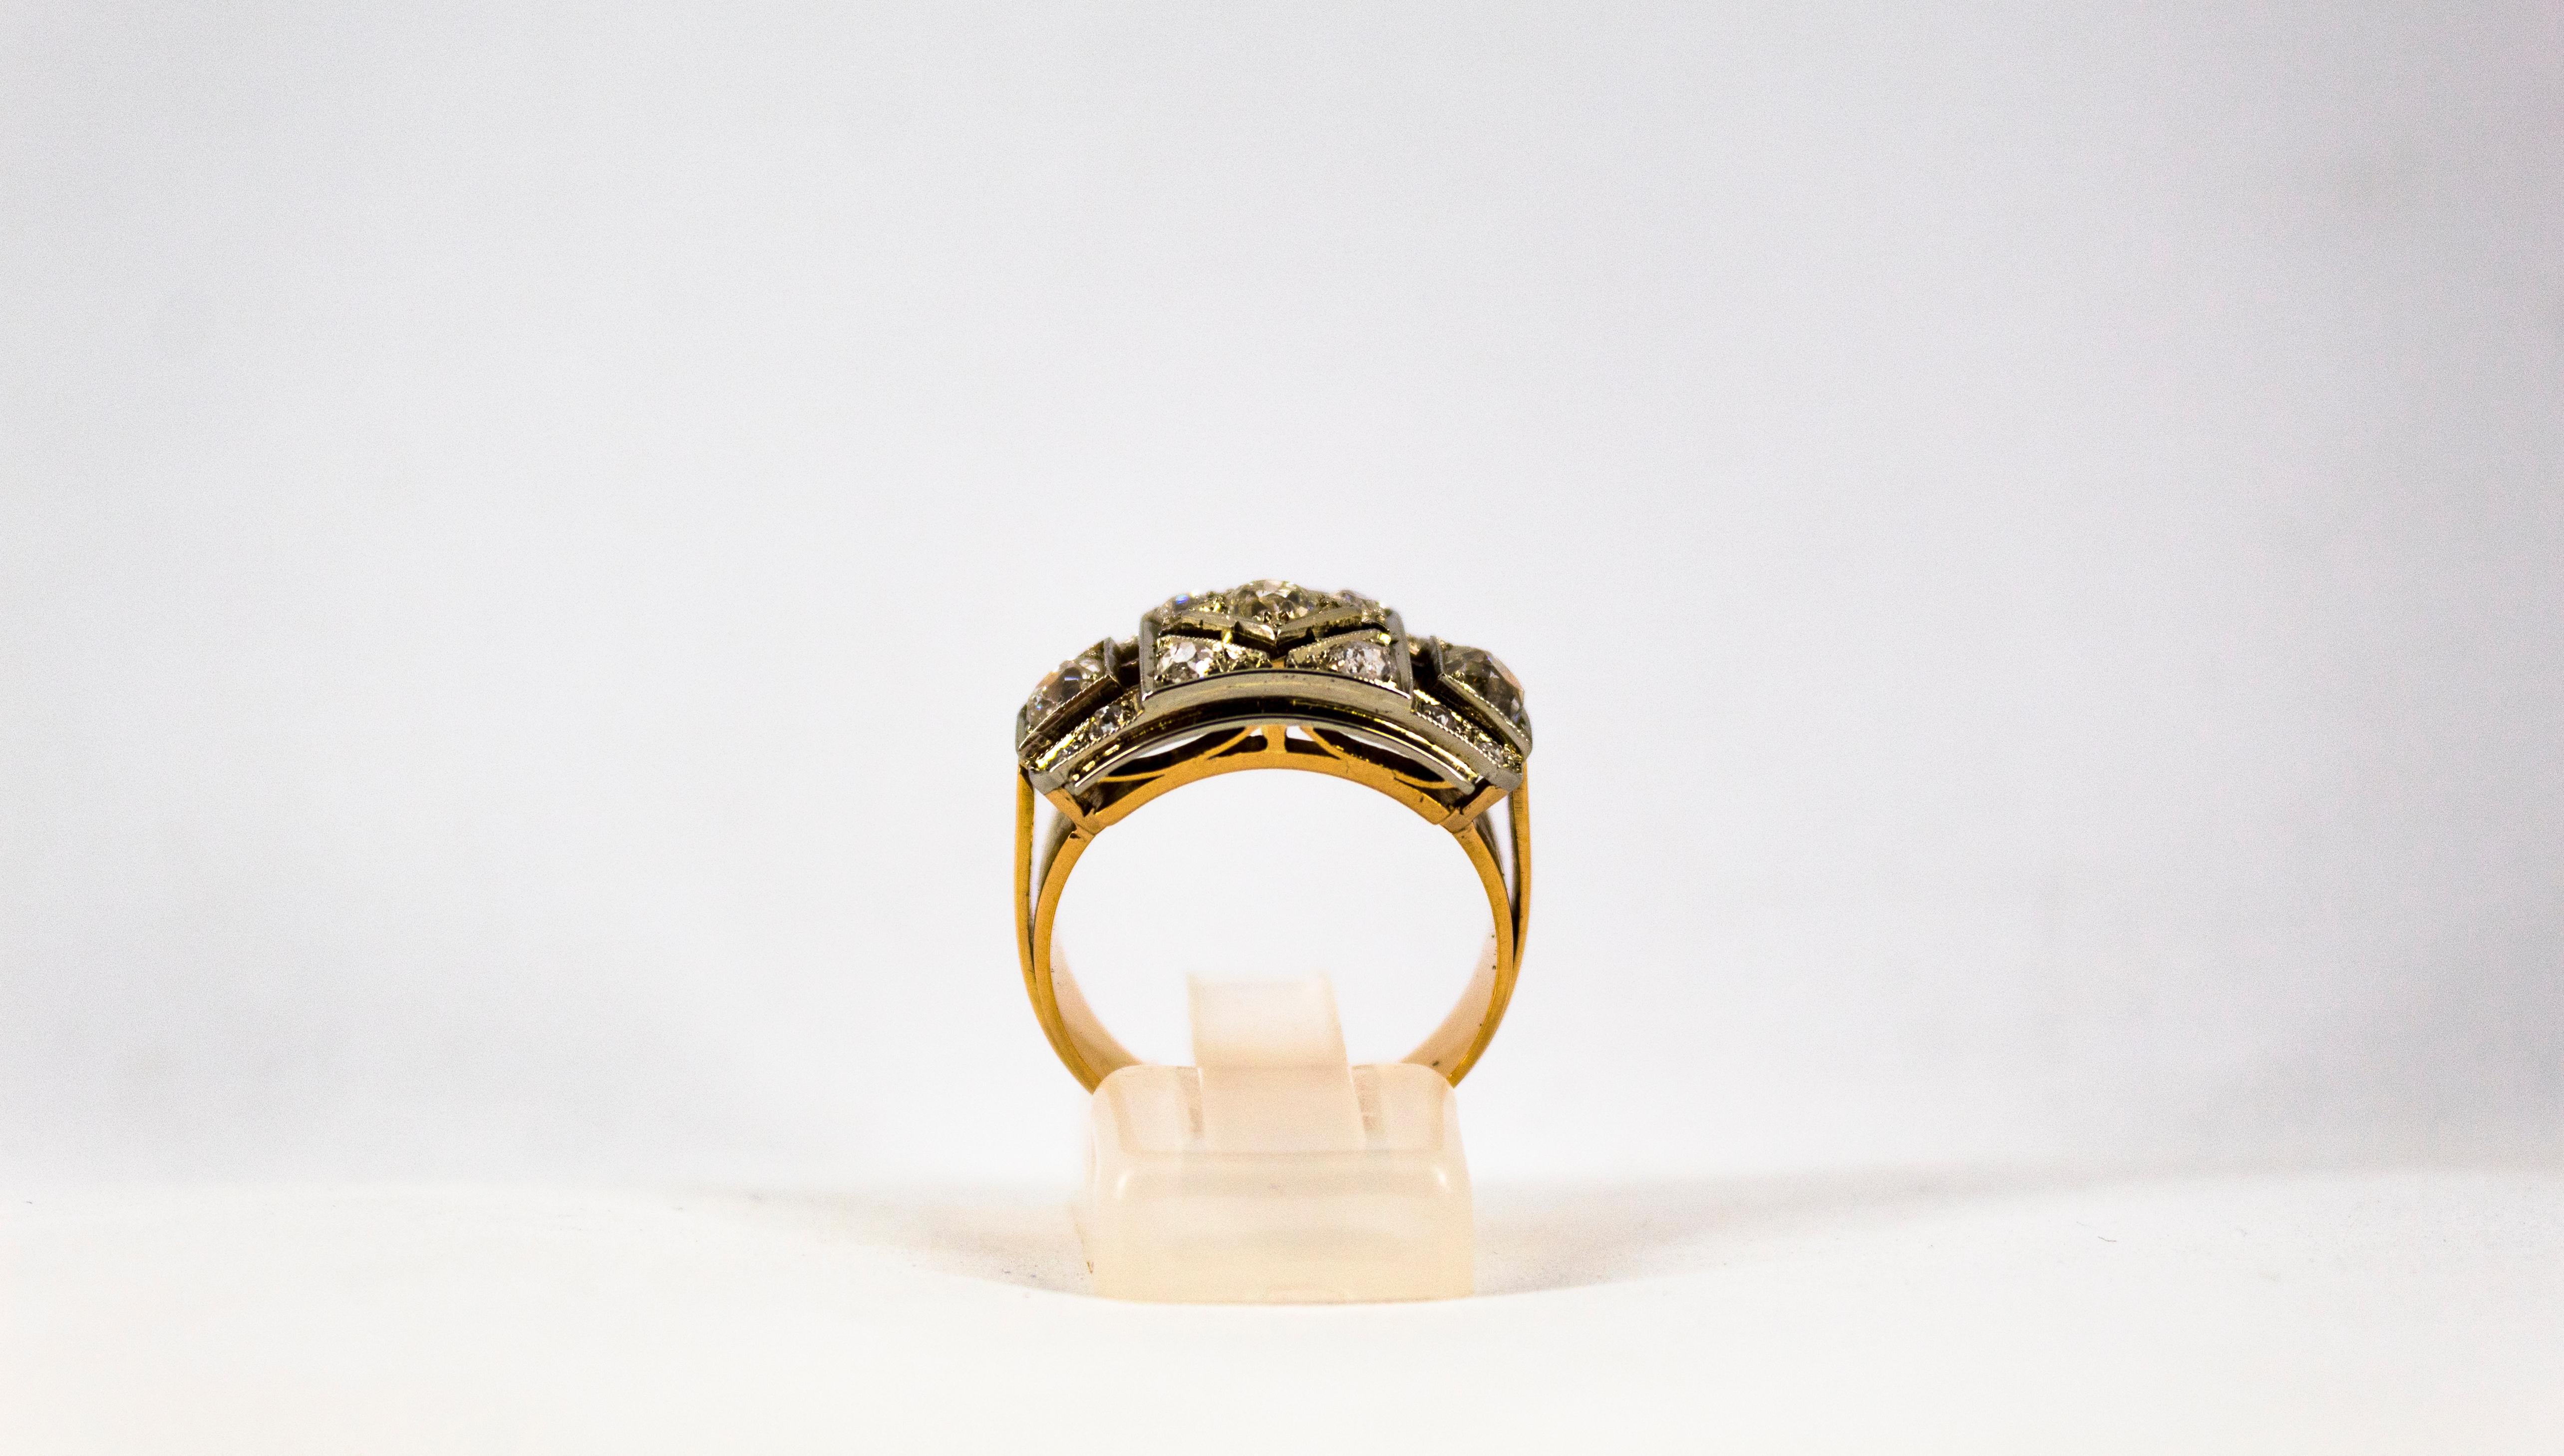 This Ring is made of 18K Yellow Gold.
This Ring has 1.20 Carats of White Diamonds.
Size ITA: 15 USA: 7
We're a workshop so every piece is handmade, customizable and resizable.